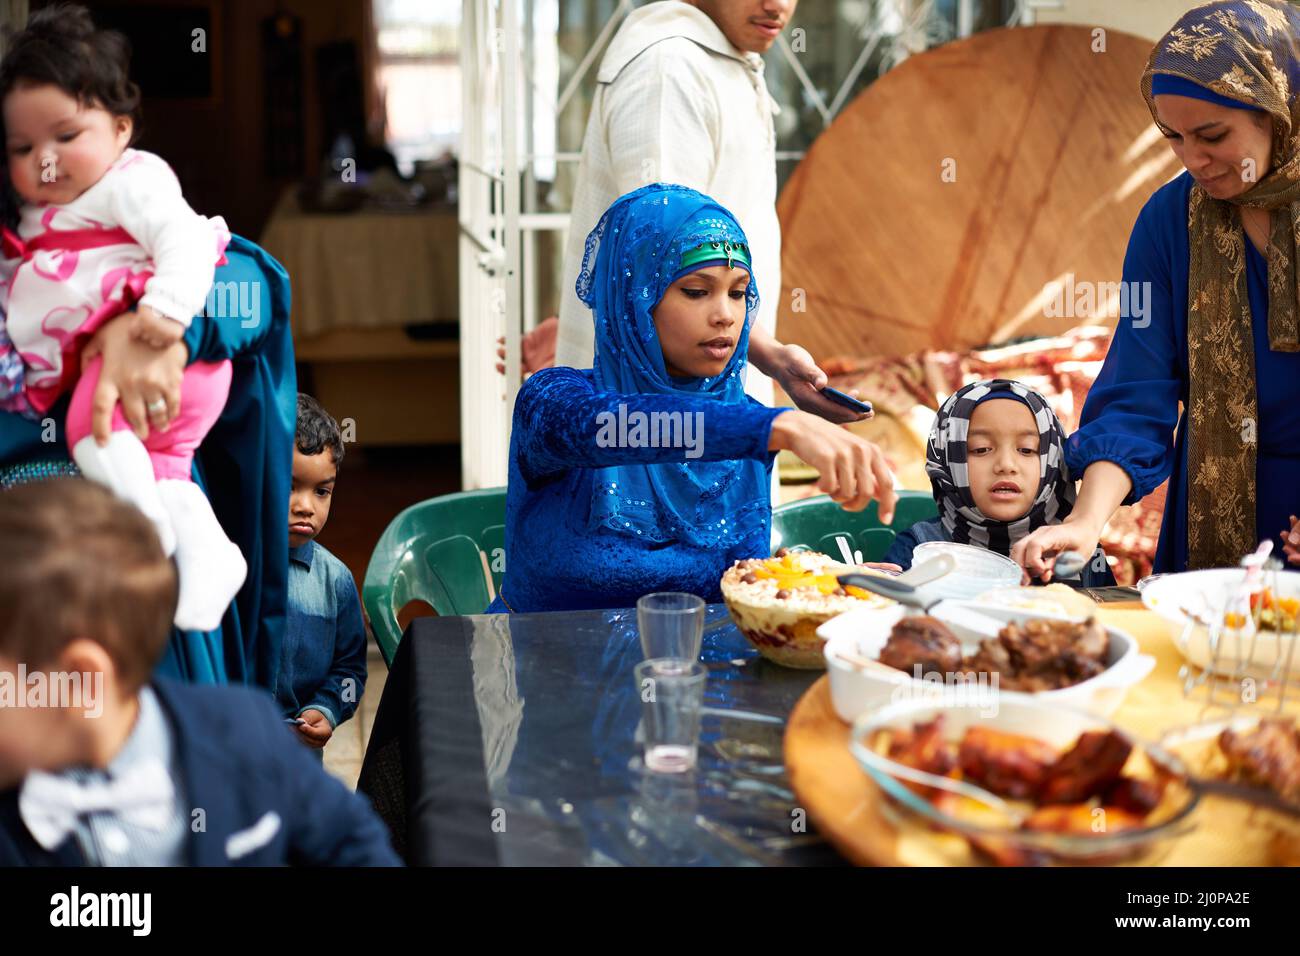 Food brings everyone together. Shot of a muslim family eating together. Stock Photo